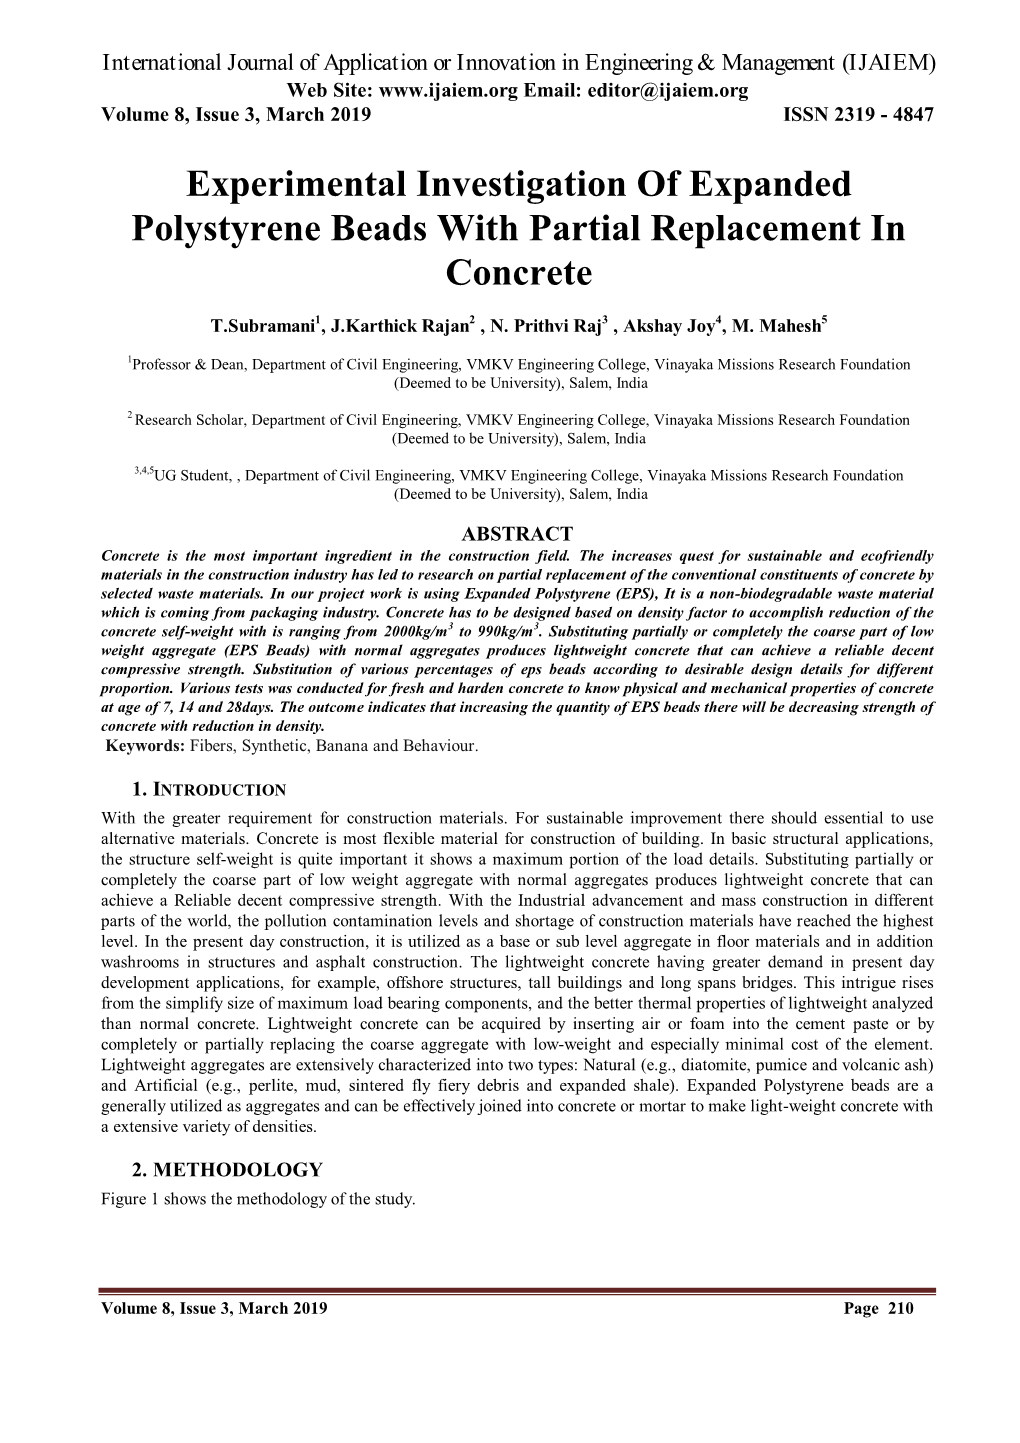 Experimental Investigation of Expanded Polystyrene Beads with Partial Replacement in Concrete